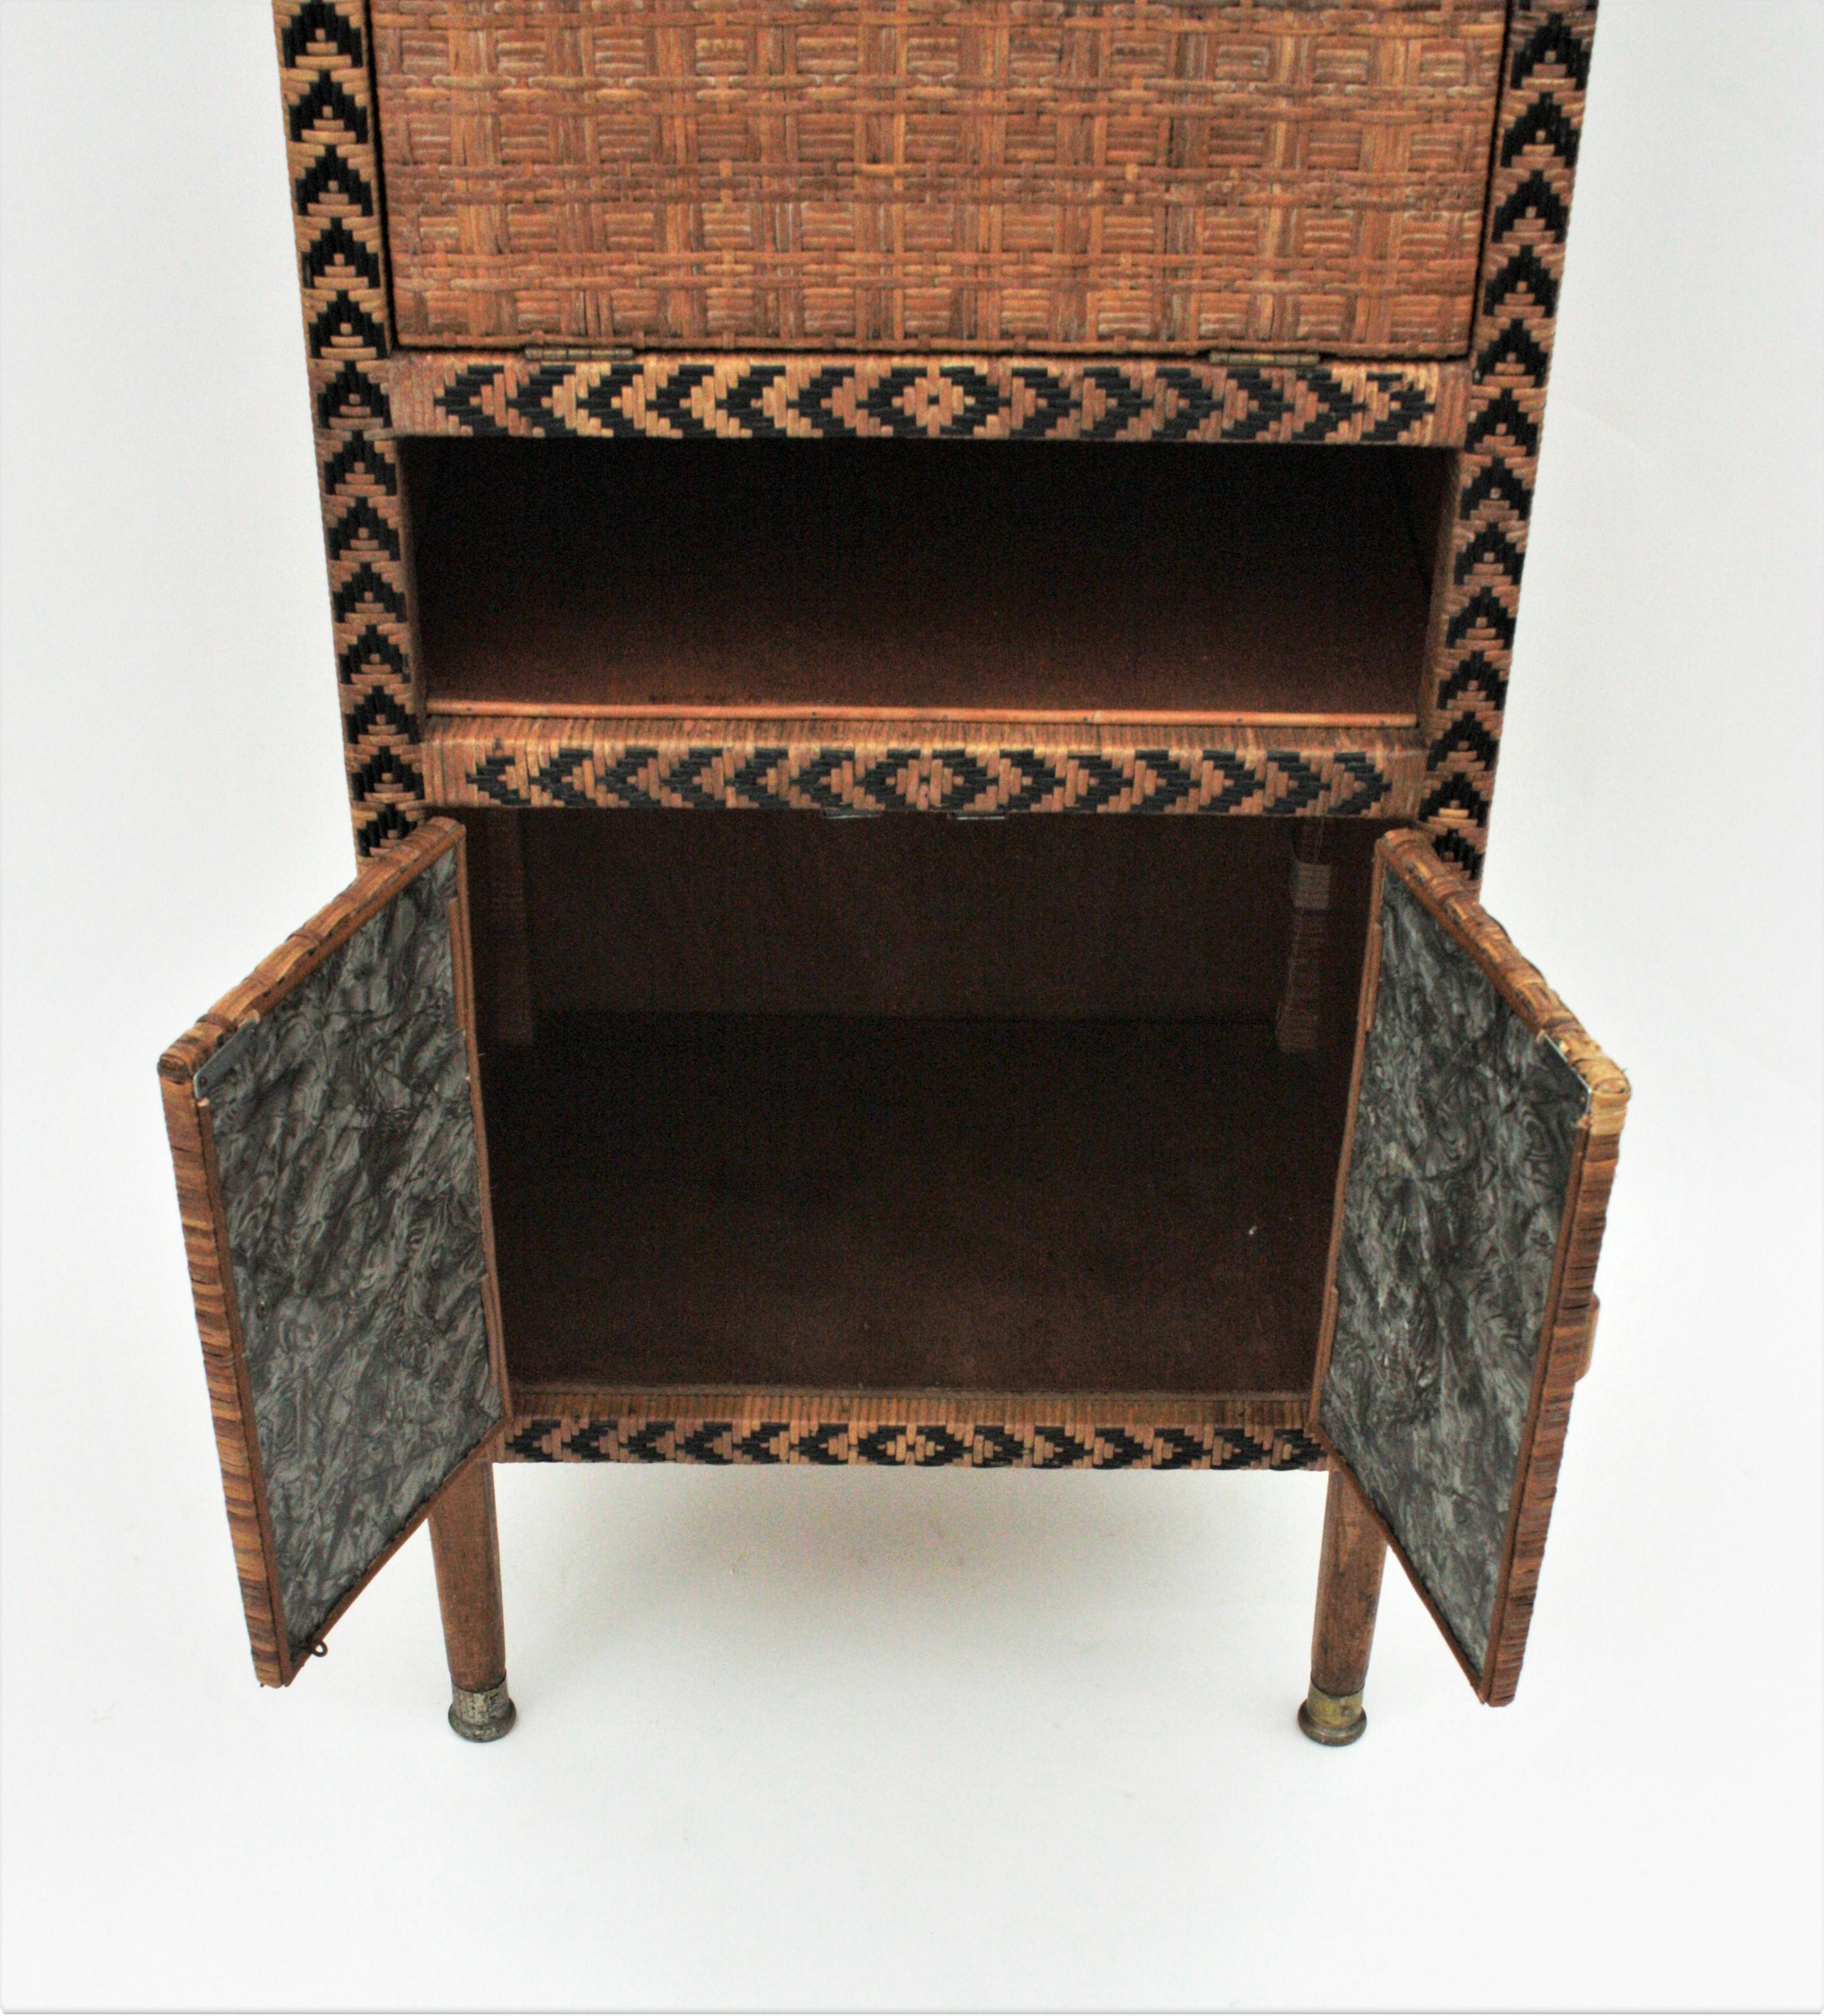 Hand-Crafted Rattan Tall Cabinet or Dry Bar